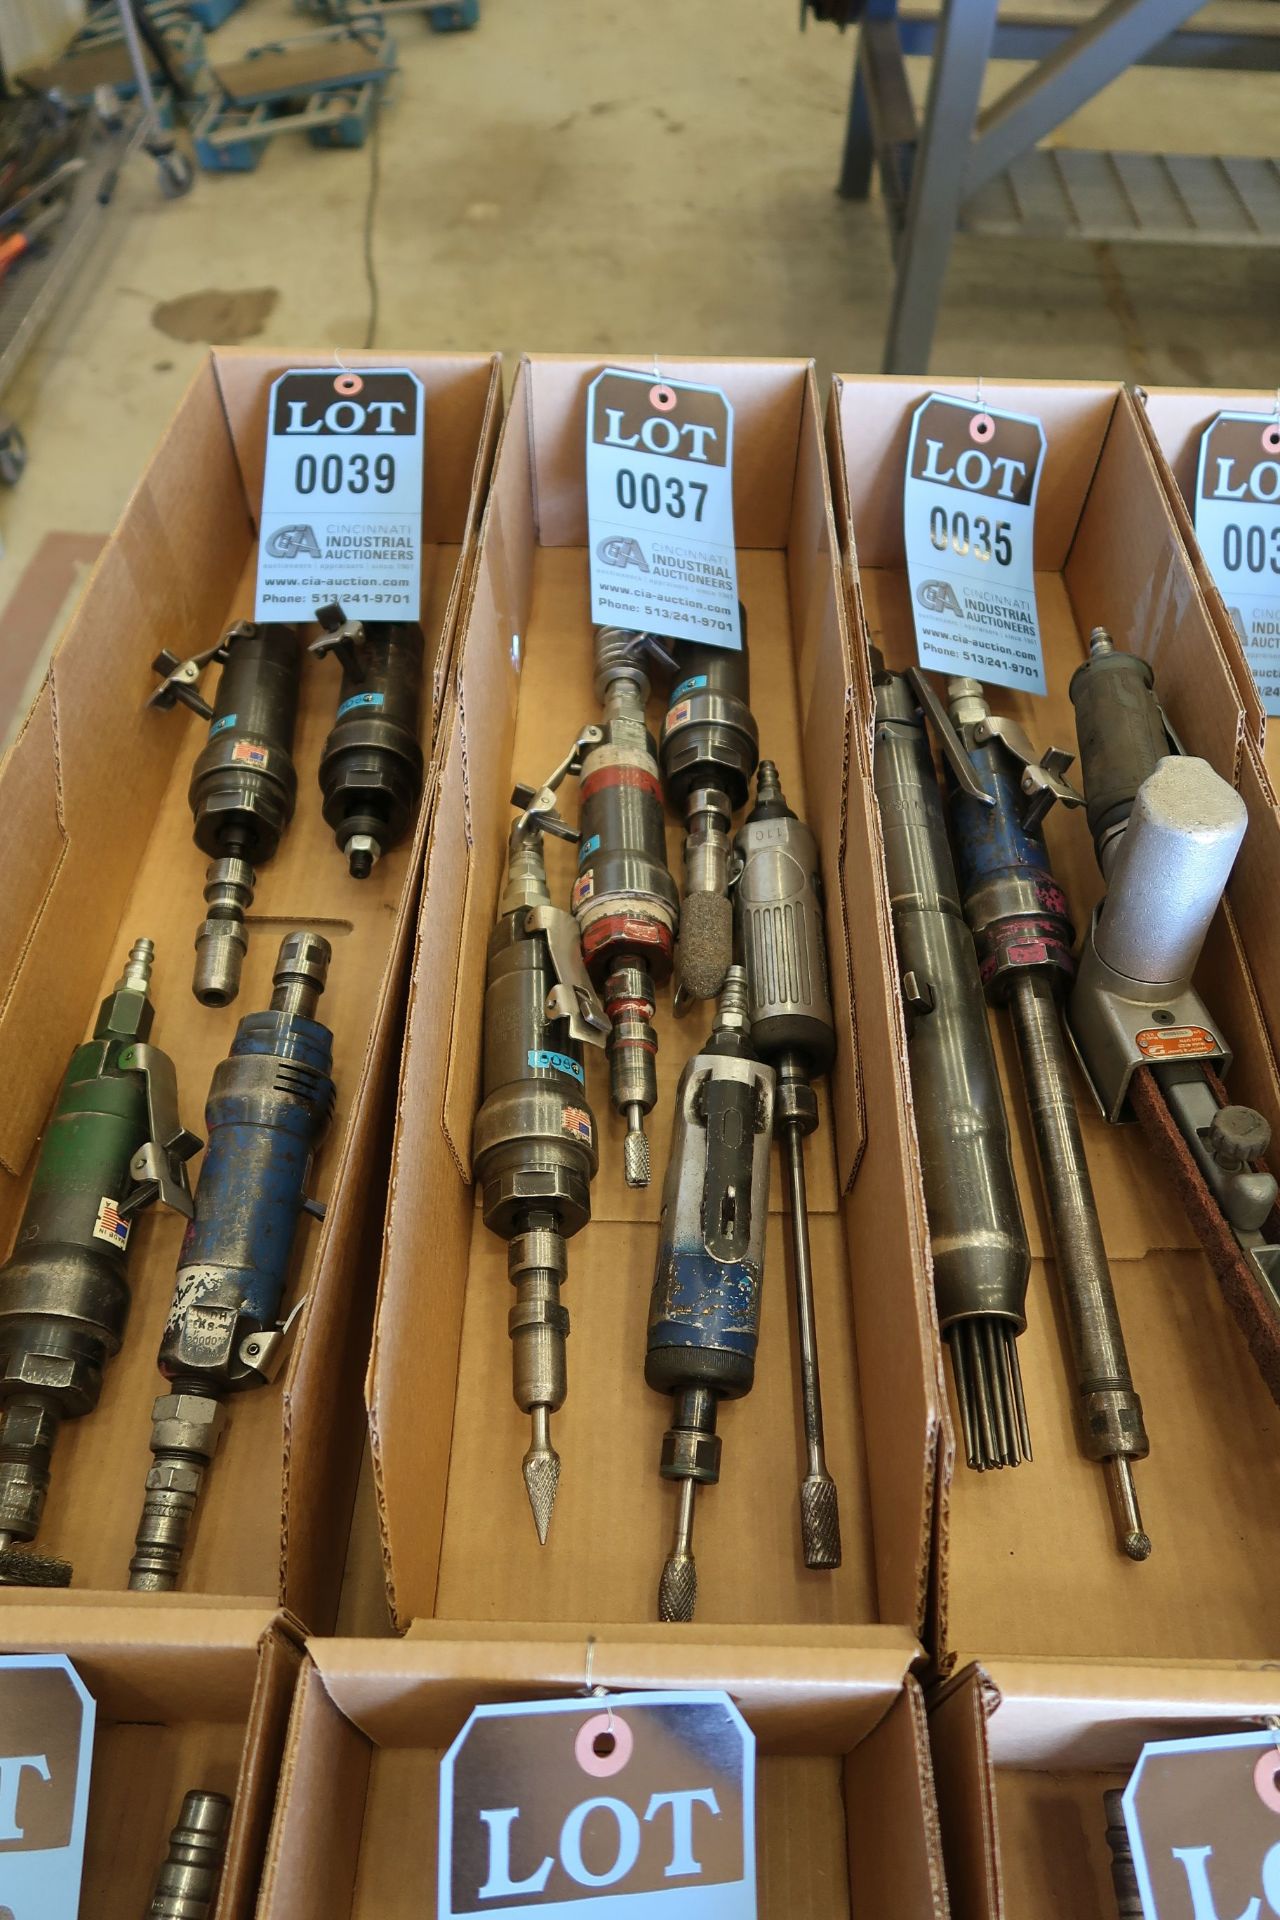 1/4" MISCELLANEOUS PNEUMATIC STRAIGHT SHAFT DIE GRINDERS